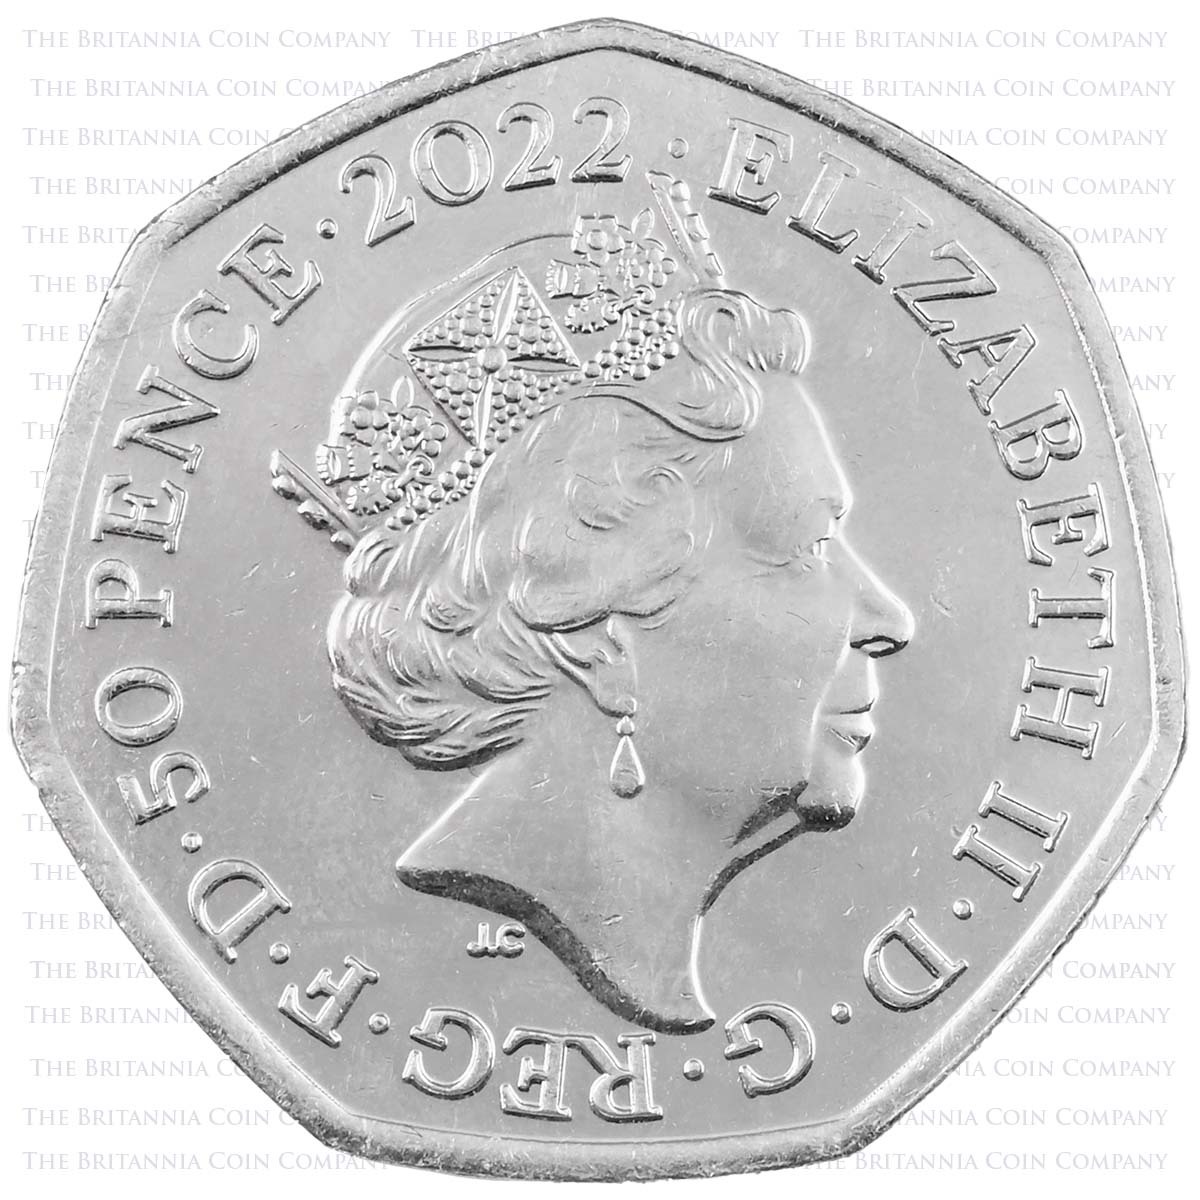 2022 Queen Elizabeth II Platinum Jubilee Circulated Fifty Pence Coin Obverse